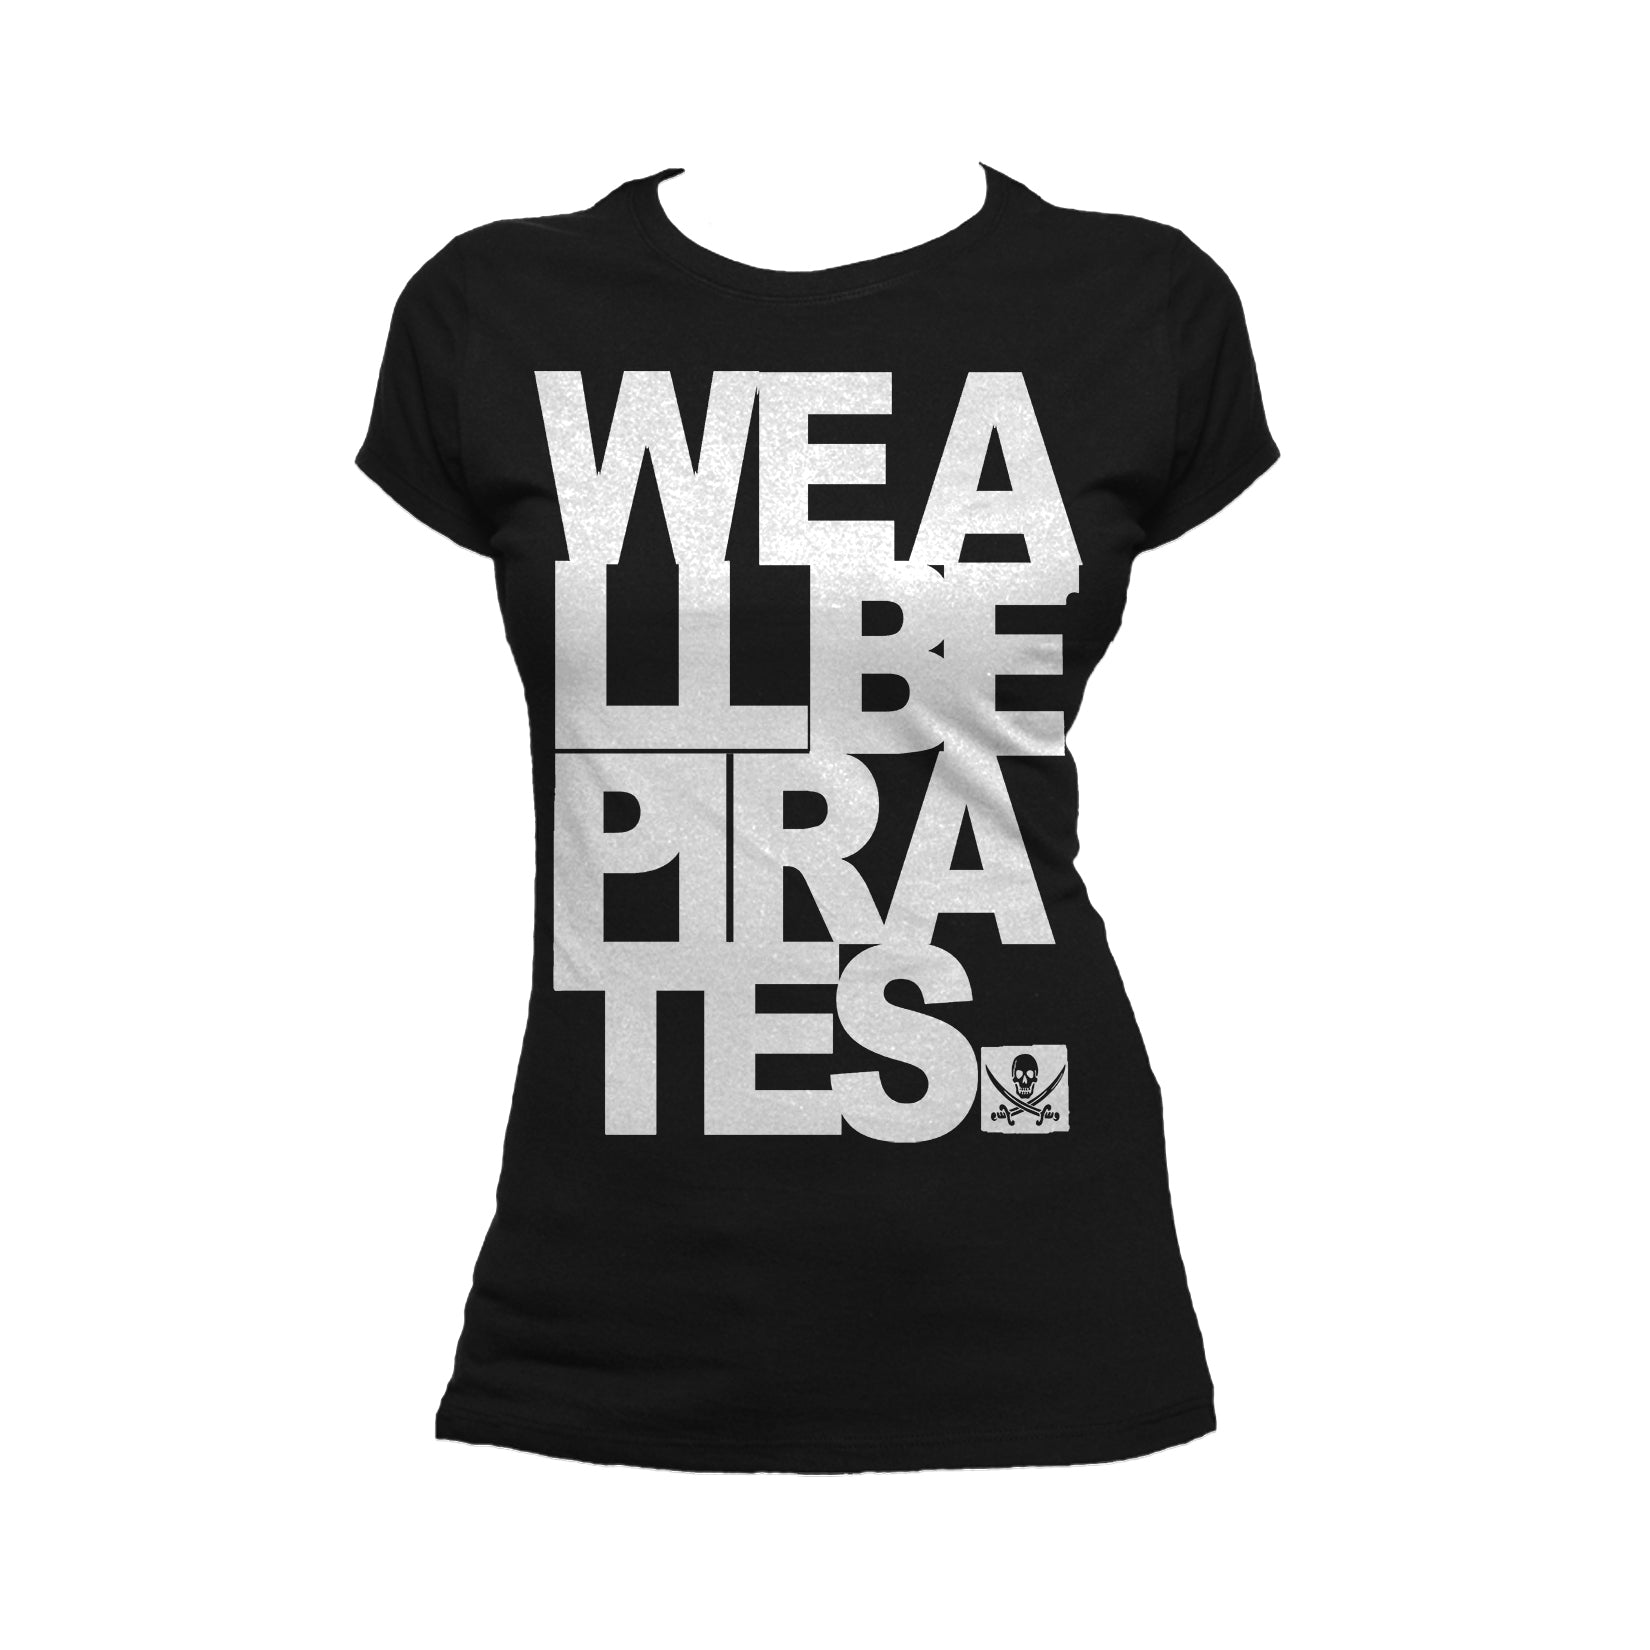 US Brand X Sci Funk We Be Pirates Official Women's T-Shirt ()